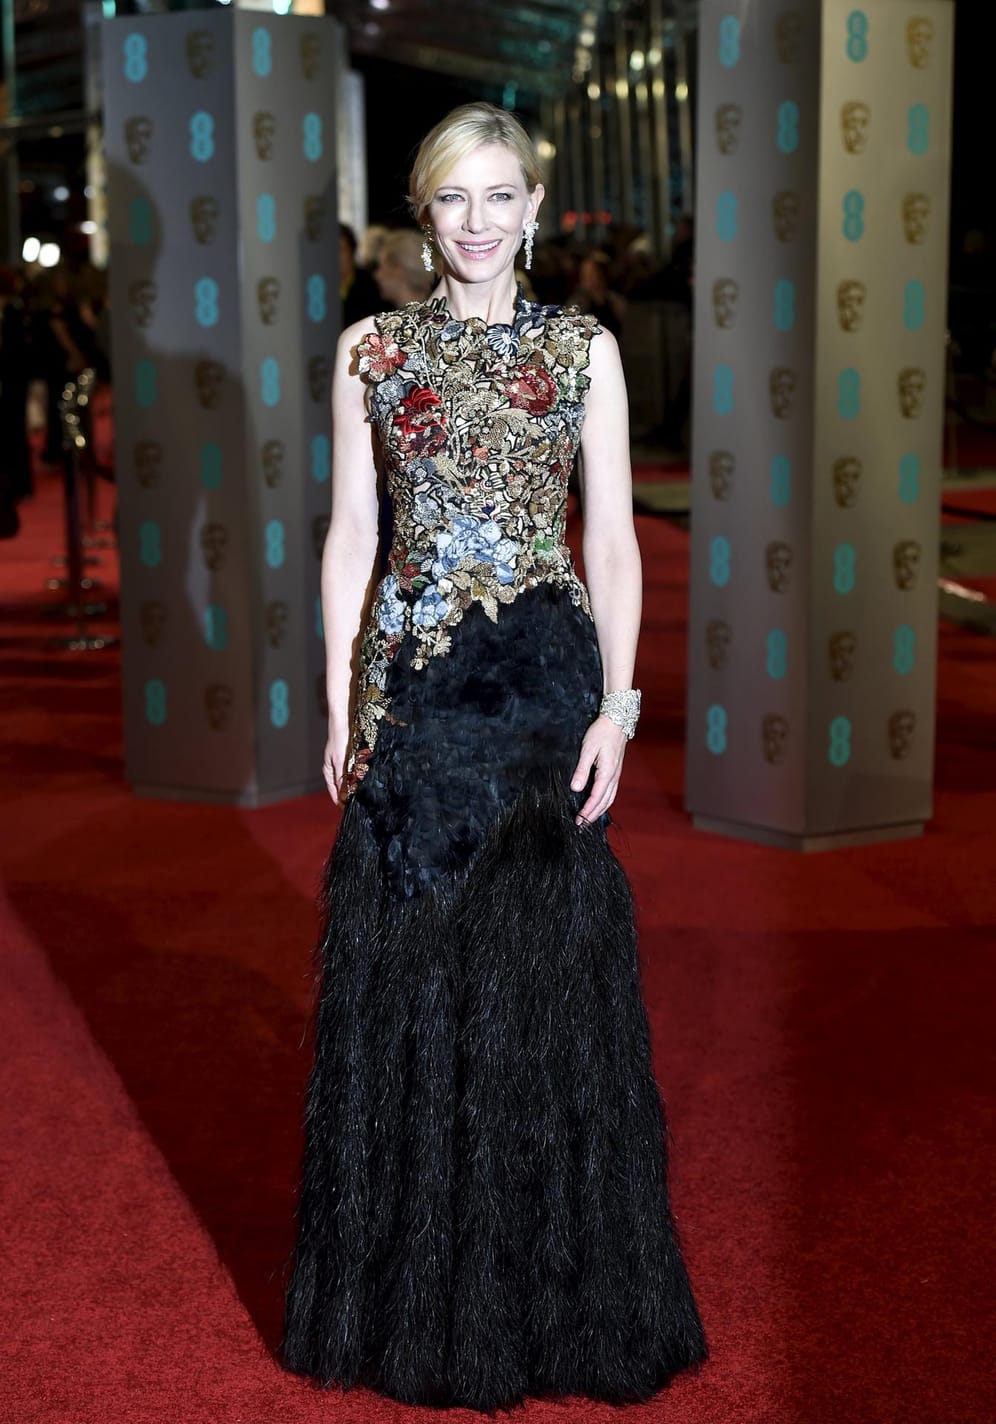 Cate Blanchett brachte Hollywood-Glamour ins Royal Opera House.